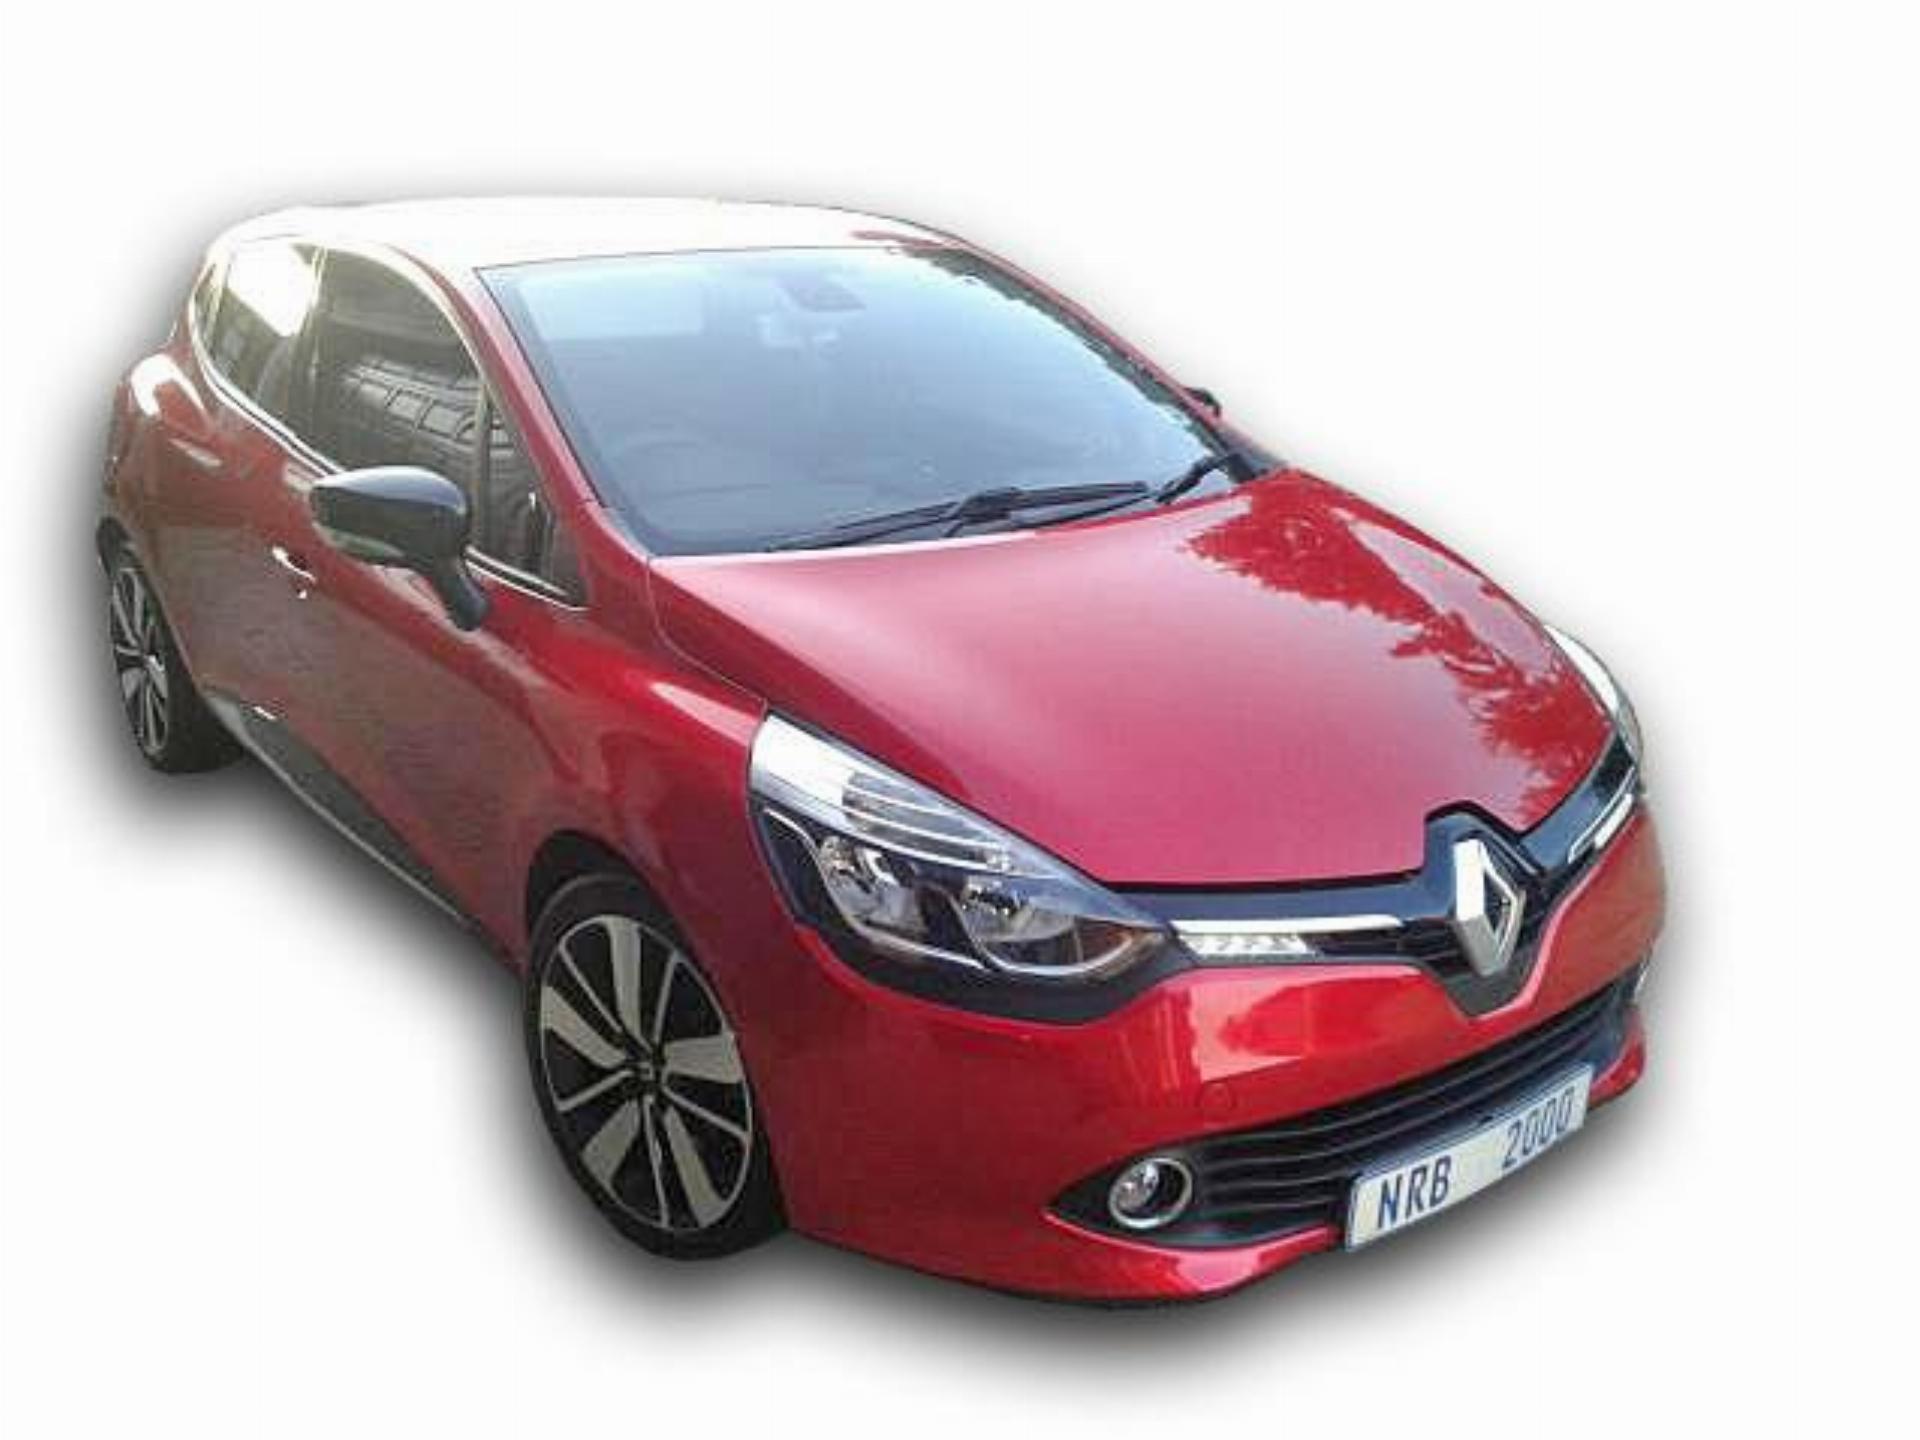 Used Renault Clio IV 900 T Dynamique 5DR 2013 on auction - PV1020597